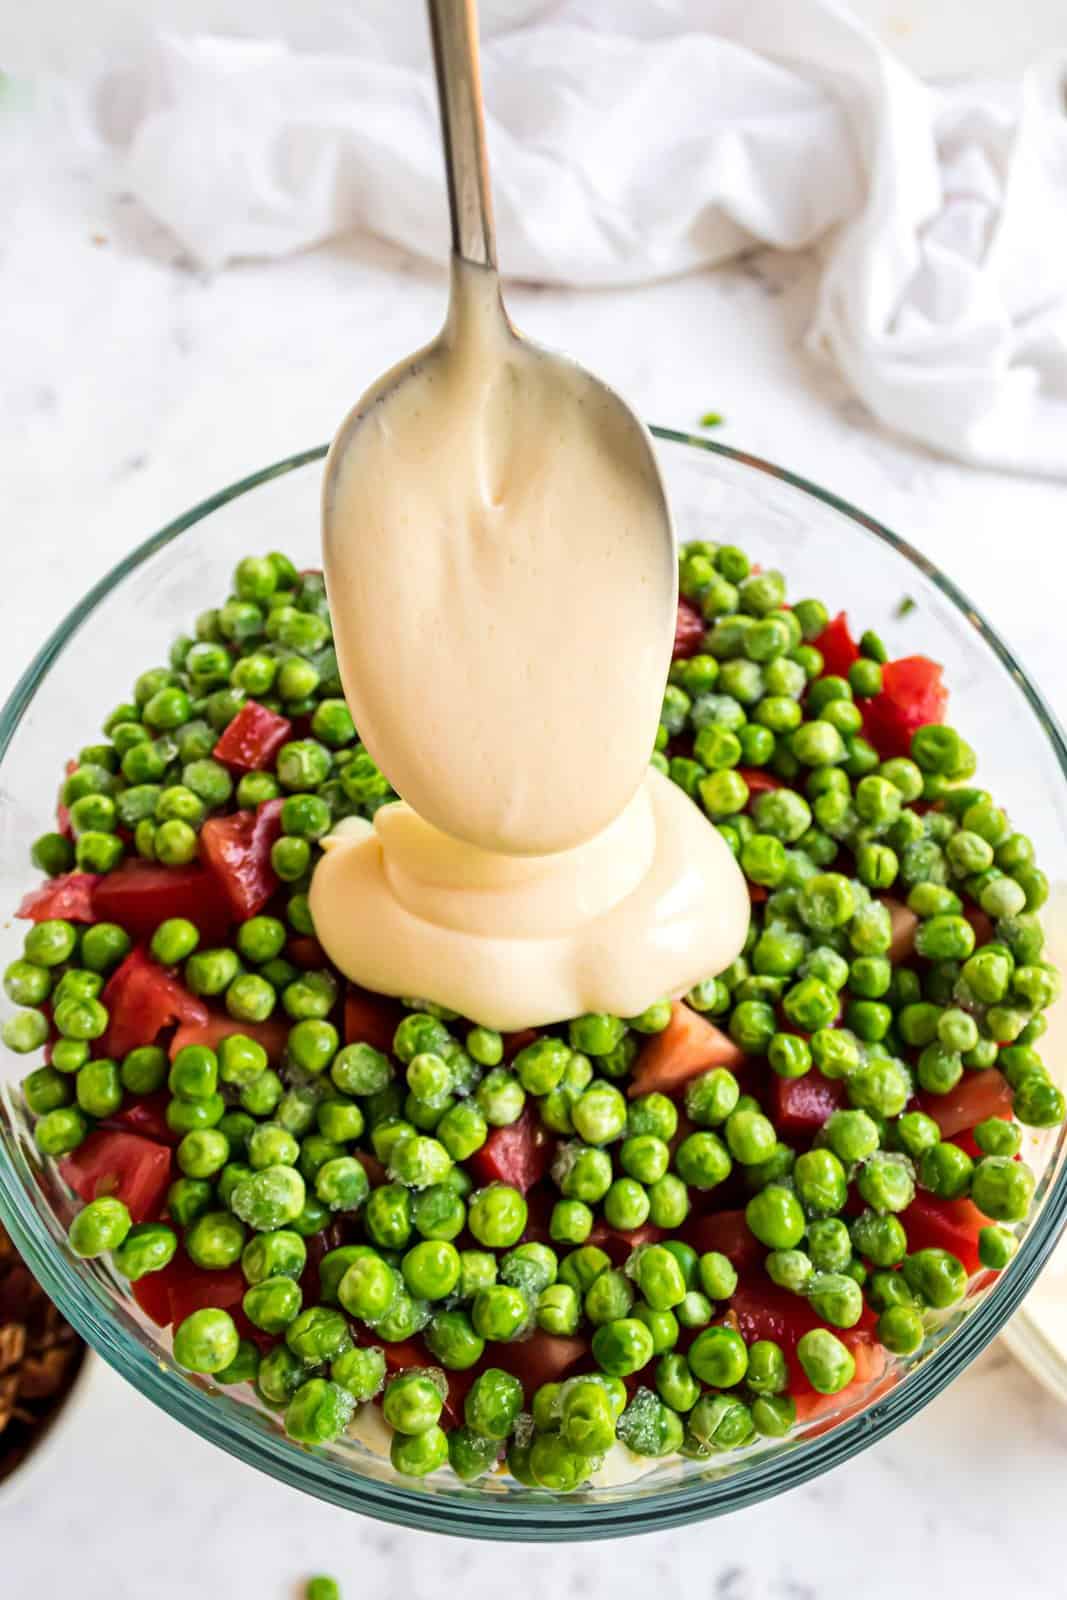 Dressing being spread over peas.